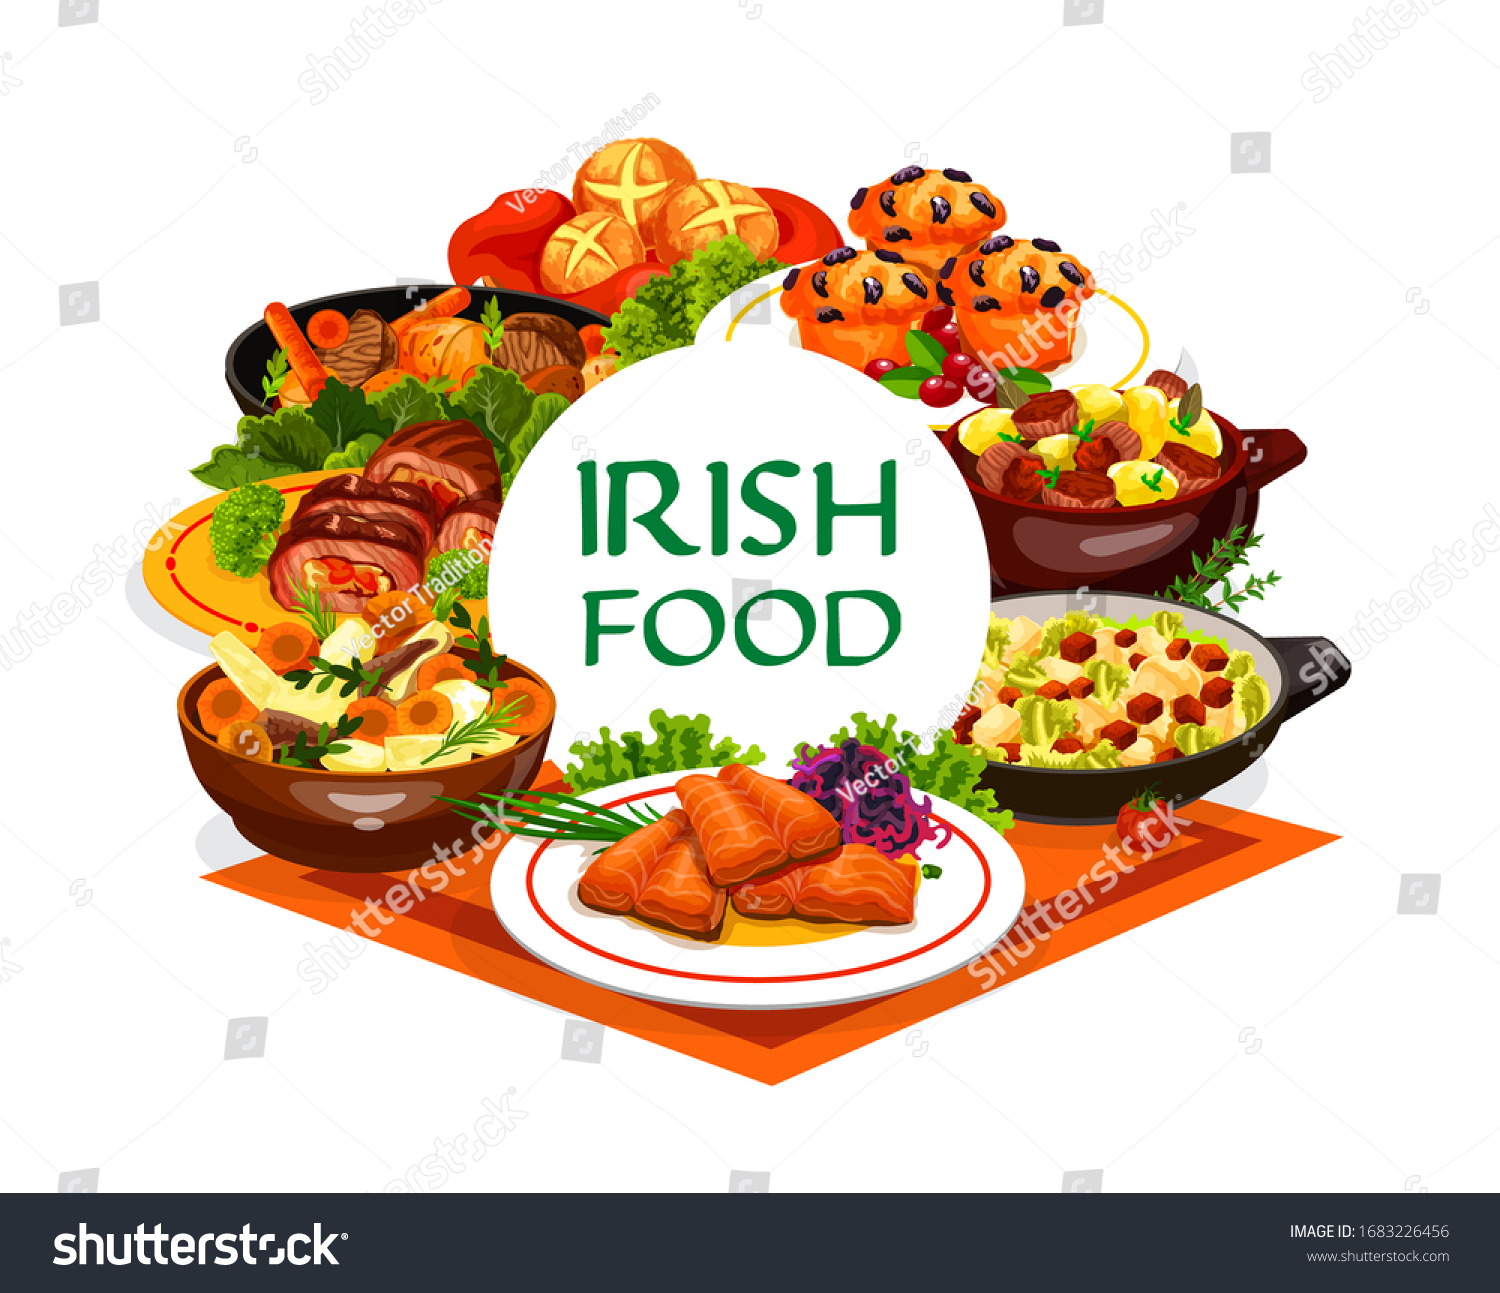 SVG of Irish cuisine food vector design of vegetable meal with meat stews and fish dishes. Mashed potato colcannon, red cabbage salad, grilled salmon, beef and lamb, soda bread and lingonberry cupcakes svg